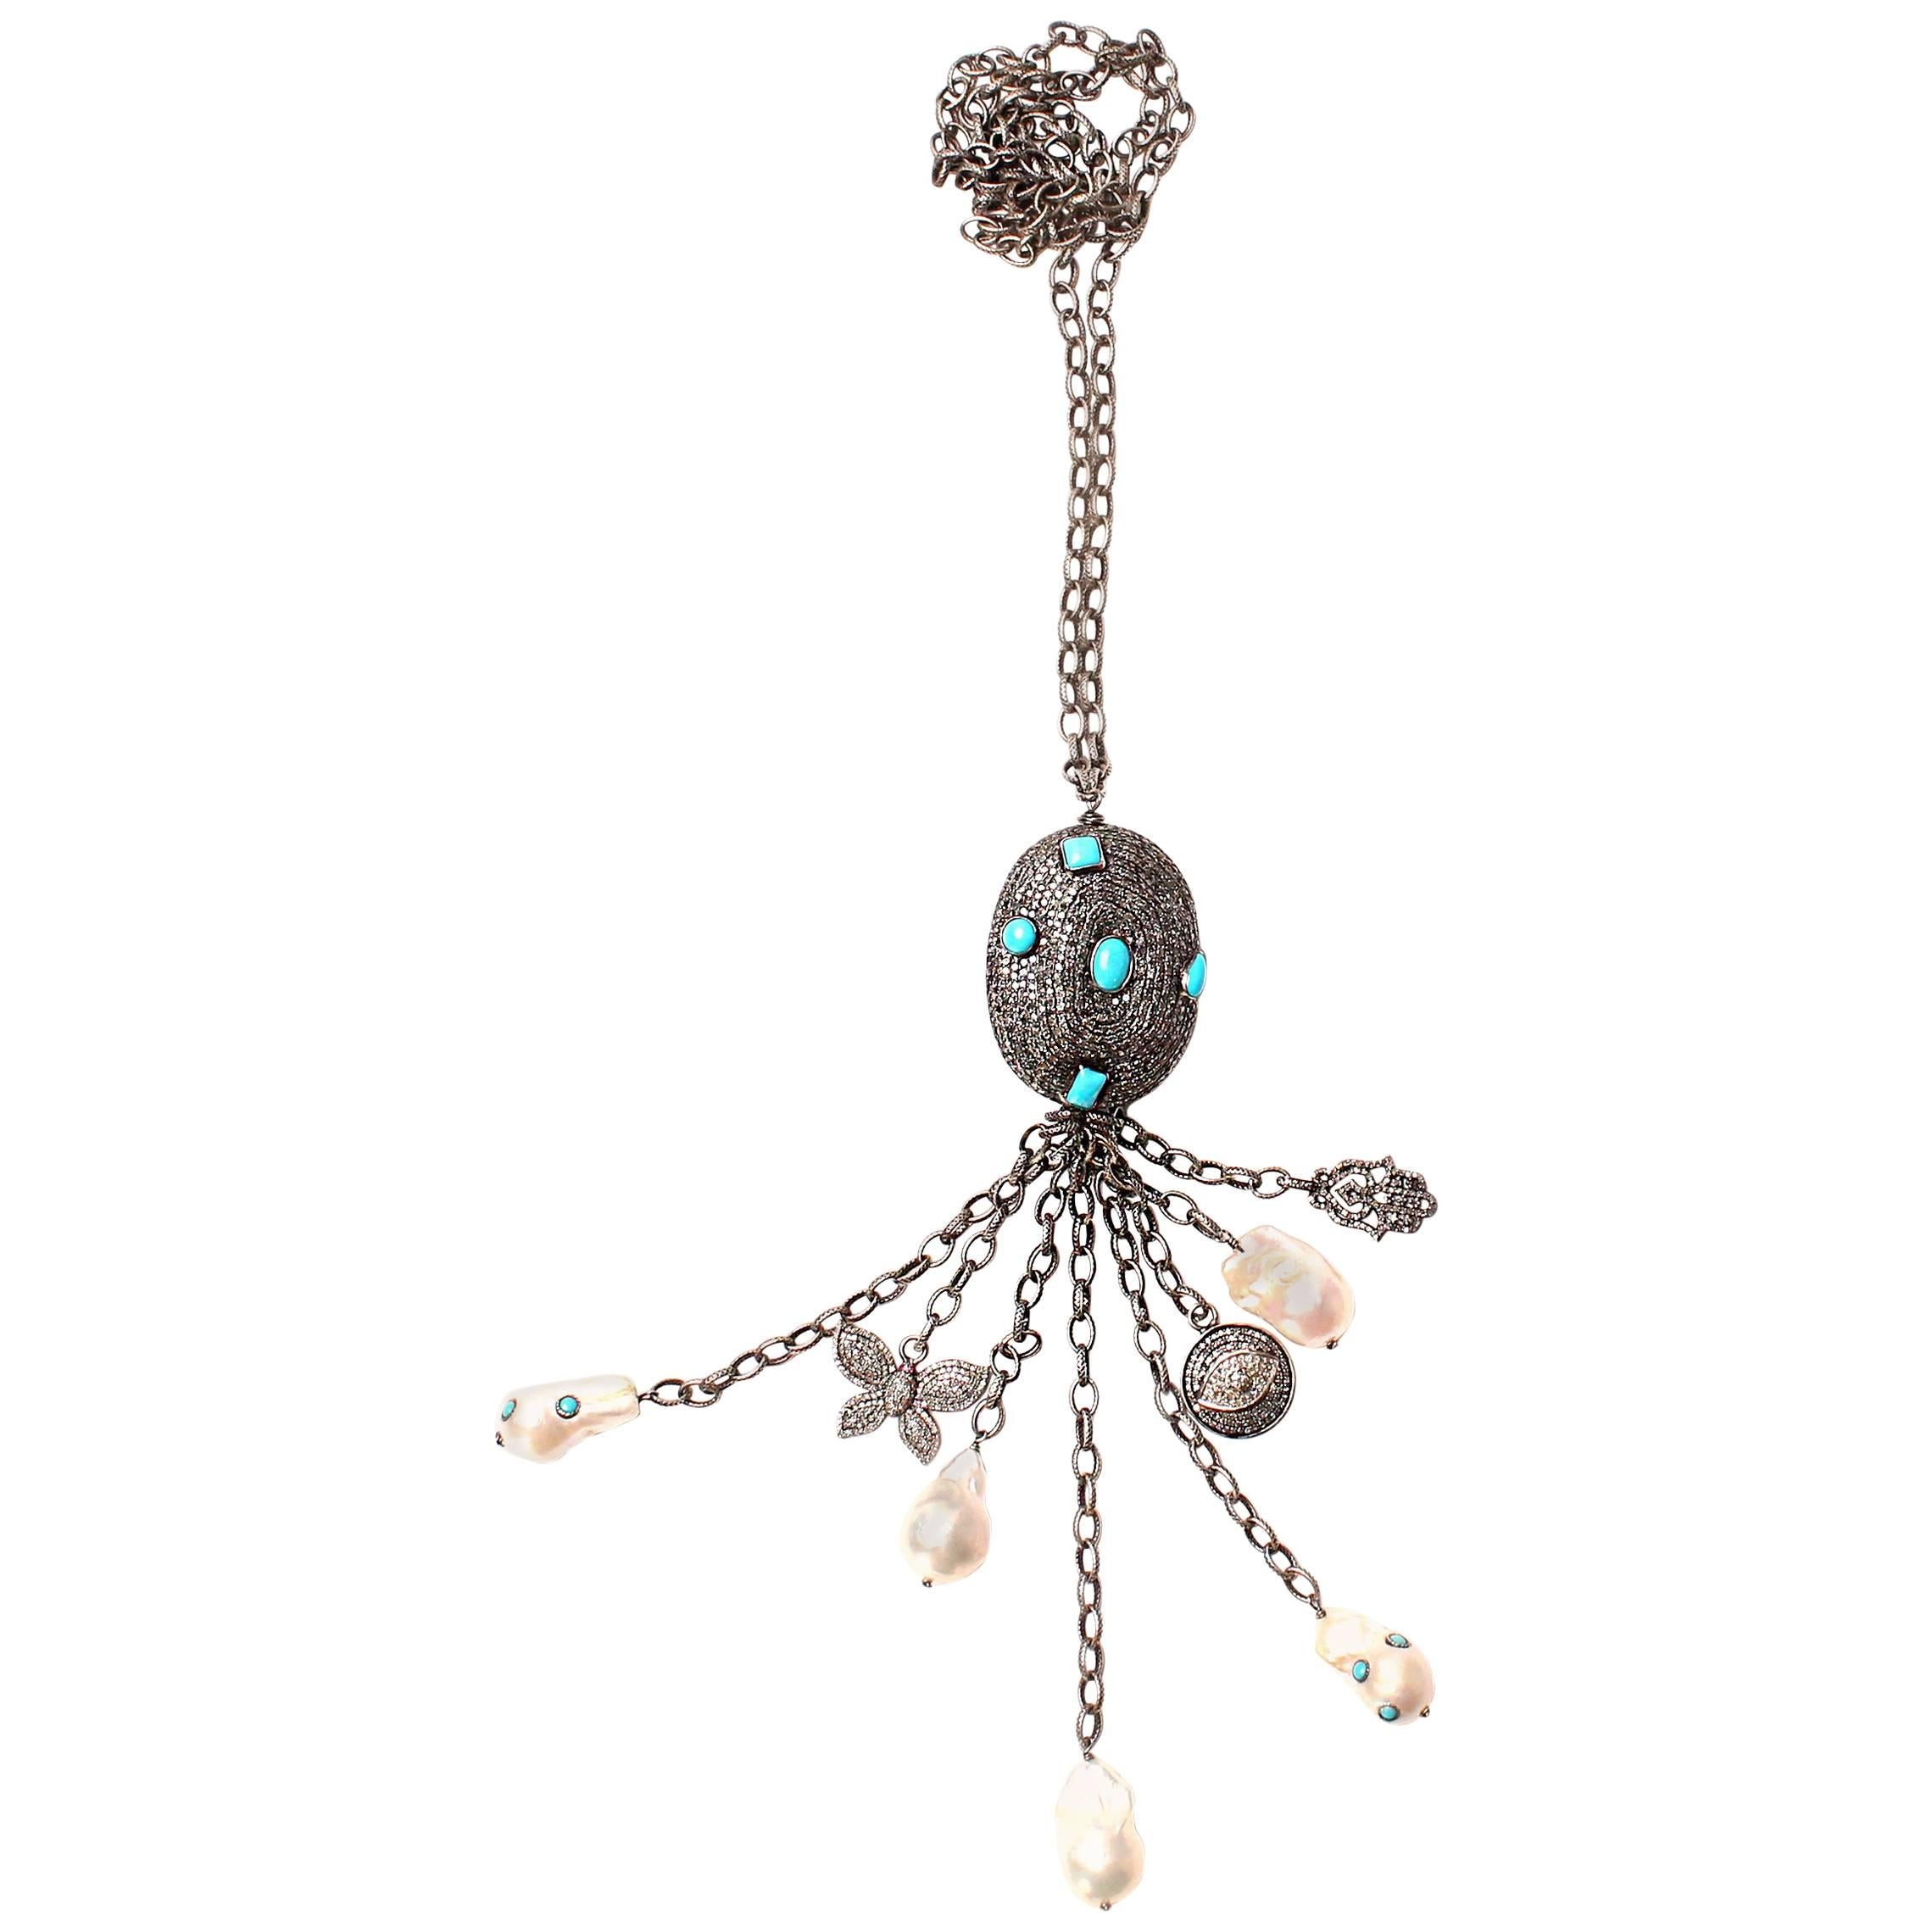 Clarissa Bronfman Turquoise, Silver, Diamond, Pearl Necklace